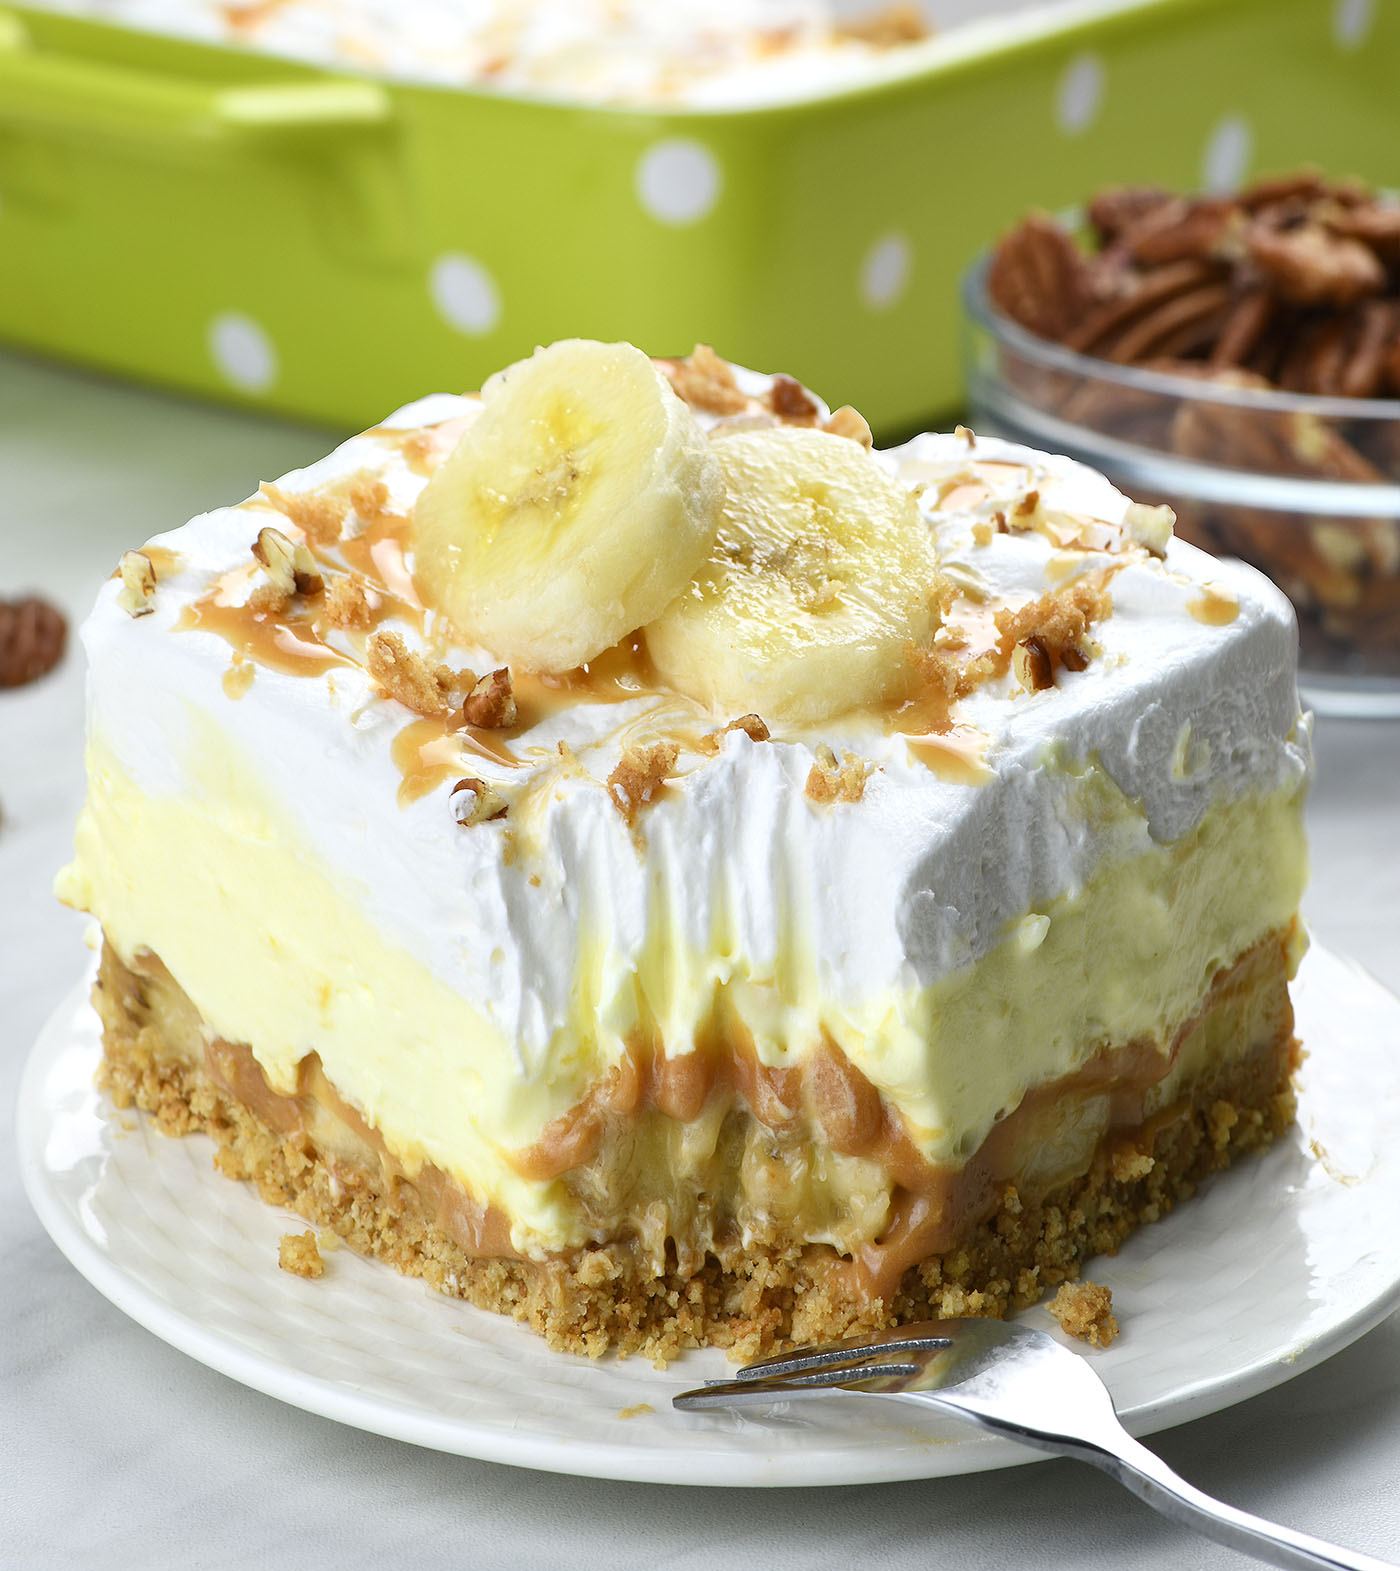 A slice of banoffee pie lasagna on a plate, showing layers of biscuit crust, caramel, banana, and cream, topped with banana slices and drizzled caramel, with nuts sprinkled on top.